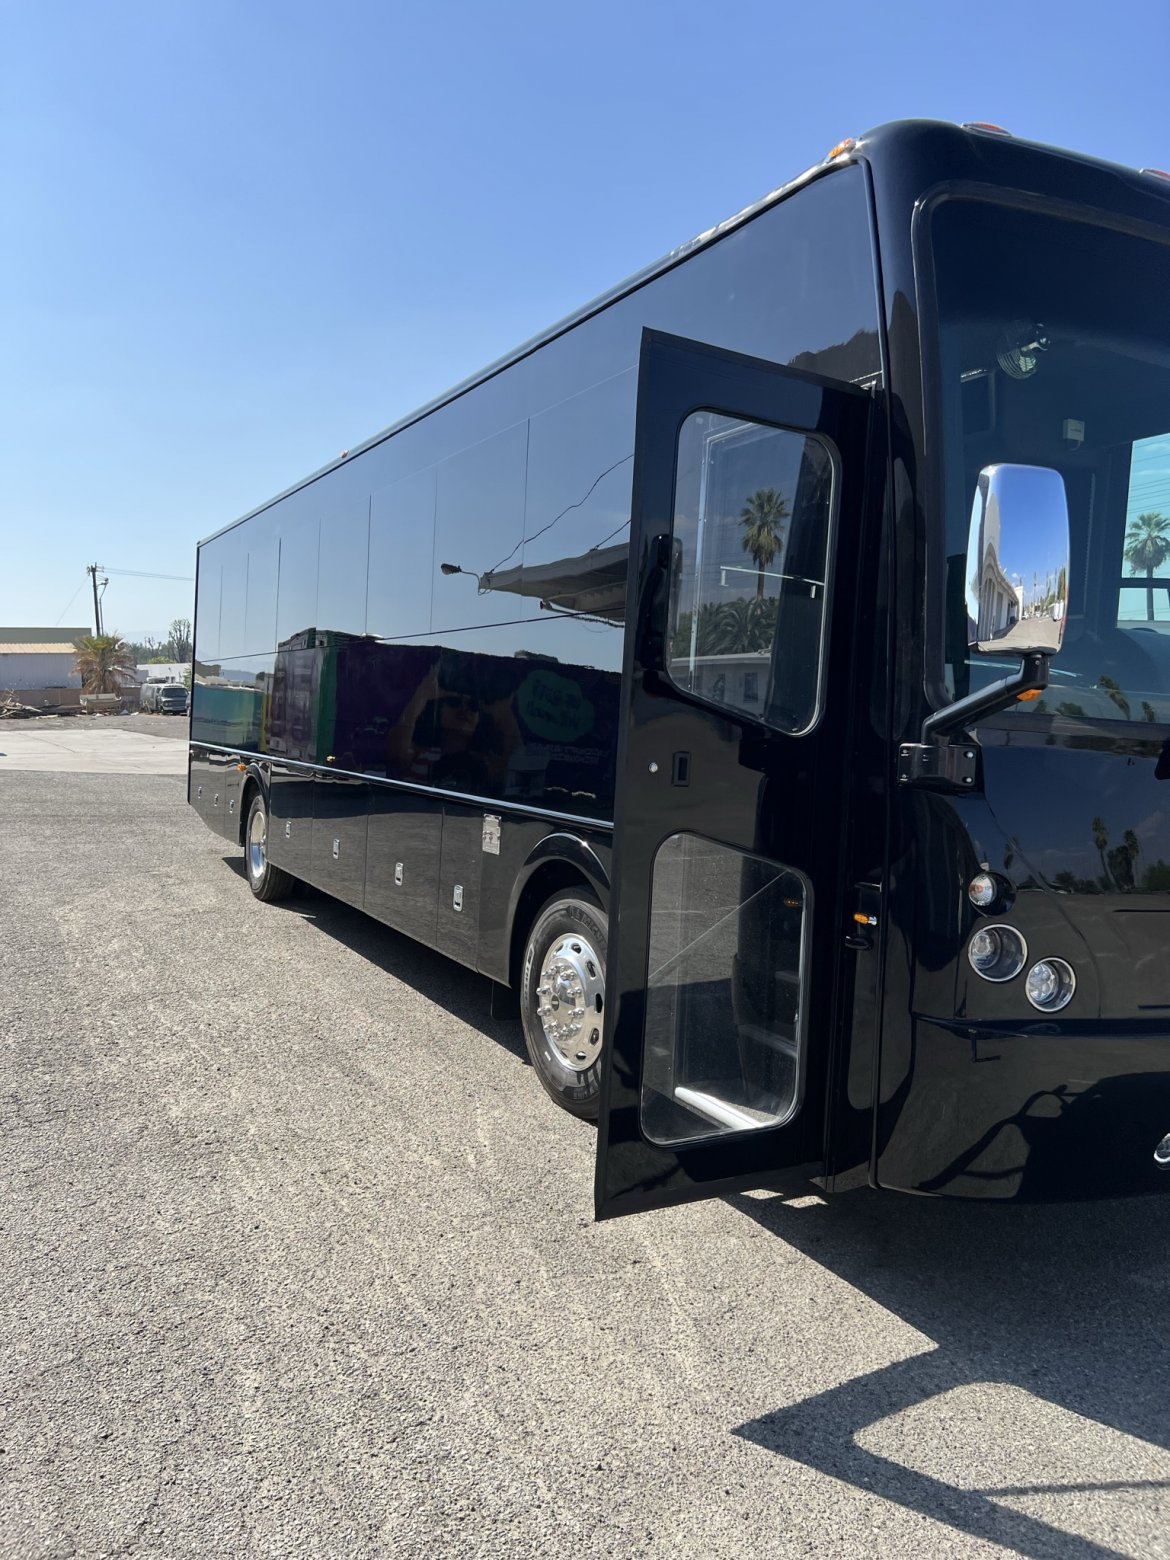 Motorcoach for sale: 2022 Freightliner CT Coachworks Motor Coach 40&quot; by CT Coachworks